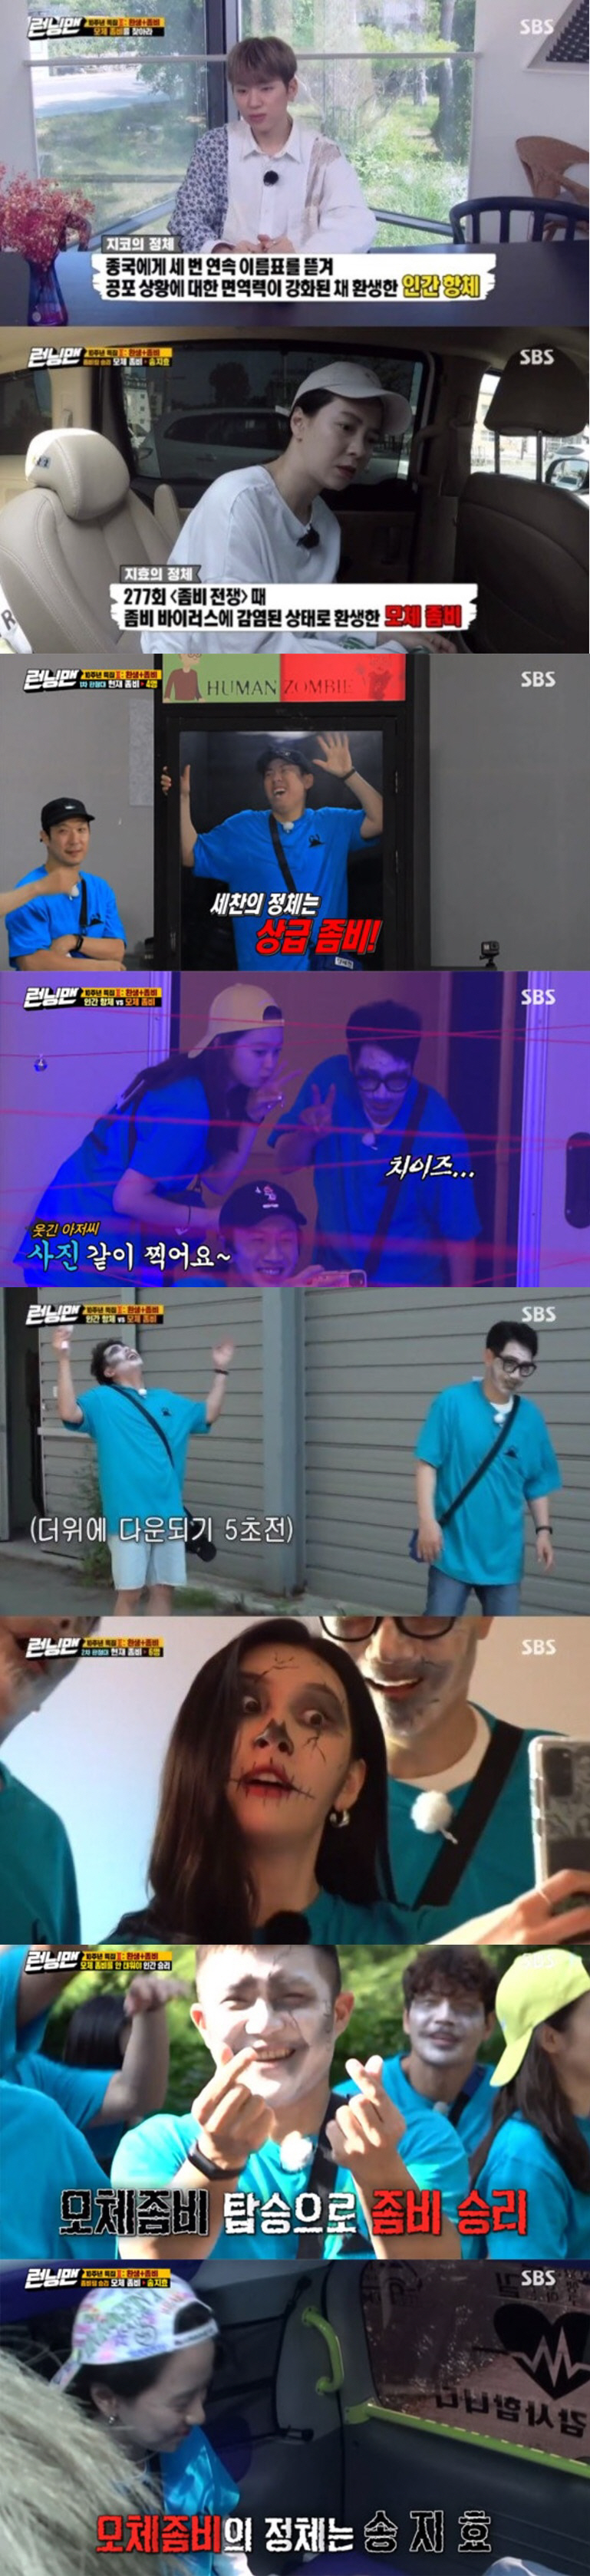 SBS Running Man presented 2020 Dead Again Special, the second part of Legend Race, on the 10th anniversary of broadcasting.The 5th broadcast was decorated with the 2020 version of Dead Again Race, which was a big topic with the composition and reversal of time and space in the 1930s and 2013 at the time of broadcasting in 2013.Singers Zico, Sunmi, comedian Jo Se-ho and Actor Lee Do-hyun joined as guests and added meaning.The members were divided into Zico team, Sunmi team, Seho team, and Dohyeon team, and they played against Zombie 2: The Dead are Among Us.In particular, Zombie 2: The Dead are Among Us had to be divided into the top-level Zombie 2: The Dead are Among Us and the bottom-level Zombie 2: The Dead are Among Us, and then found a decision ticket to set up the top-level Zombie 2: The Dead are Among Us on the judging panel.With comedian Ji Suk-jin being raided by Zombie 2: The Dead are Among Us and becoming a junior Zombie 2: The Dead are Among Us, Yang Se-chan, who was first on the judging board, failed to find the vaccine and became a senior Zombie 2: The Dead are Among Us.Since then, the members have become senior, junior Zombie 2: The Dead are Among Us, narrowing the position of humans.Among them, Yoo Jae-Suk survived and found the Infection room by chance, and he got into the emergency car with Zico, who revealed that he was a human antibody, and Song Ji-hyo, who ate the vaccine.But it turns out that Song Ji-hyo is the mother of Zombie 2: The Dead are Among Us, and humans are defeated.The scene had the highest audience rating of 7.1% per minute, taking the best one minute.